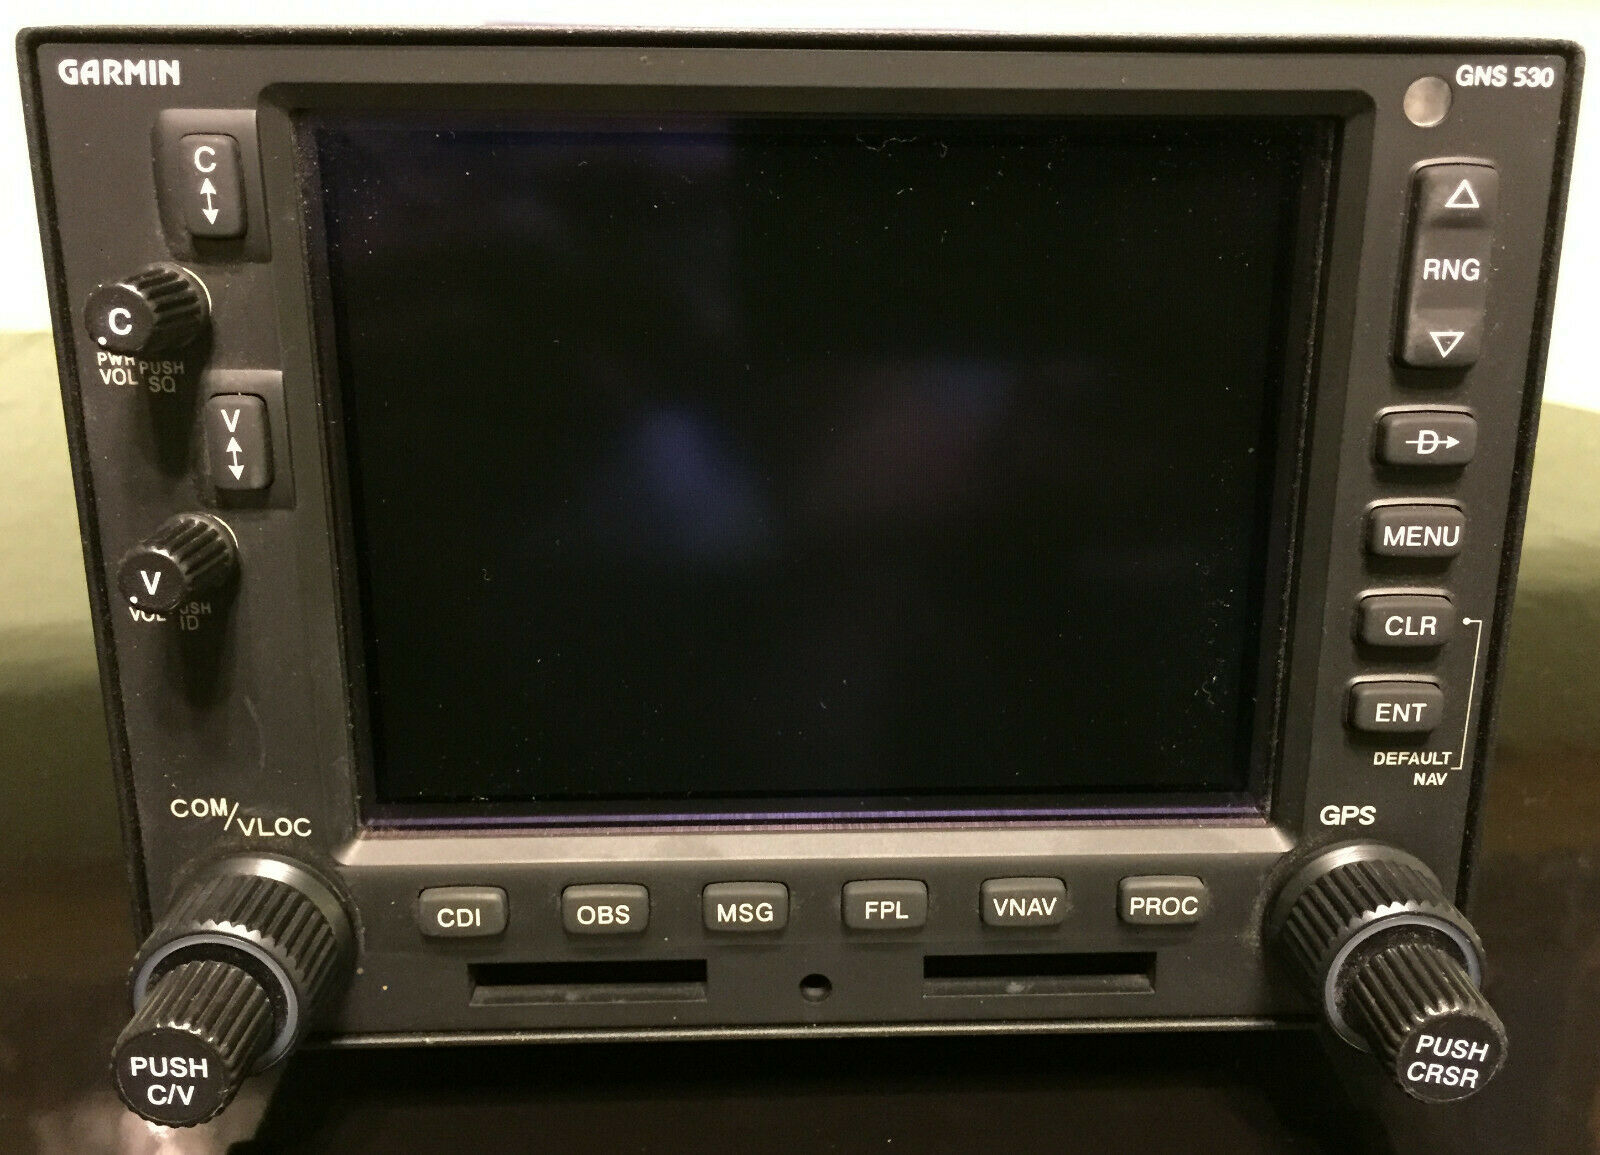 location of the garmin 530w serial numbers